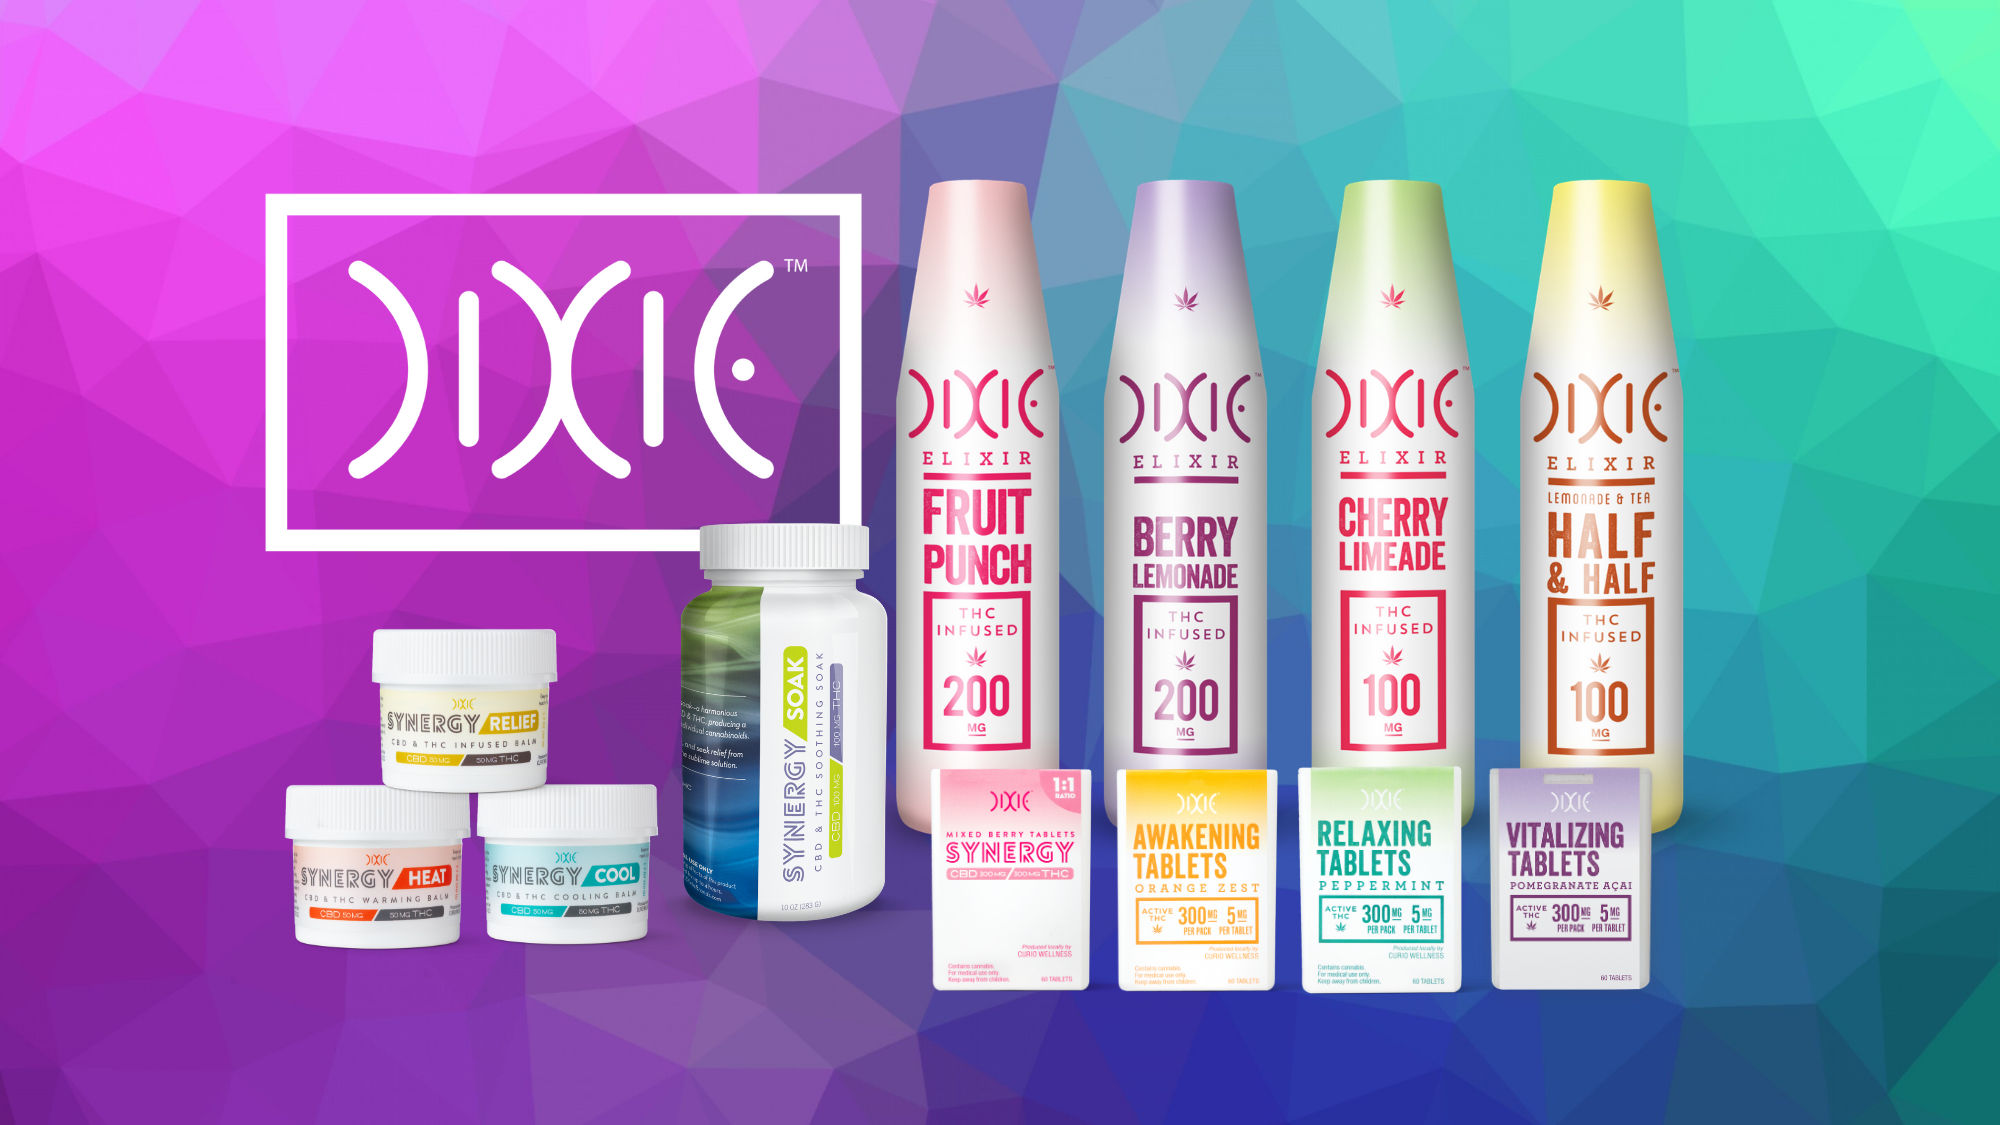 Dixie medical cannabis products